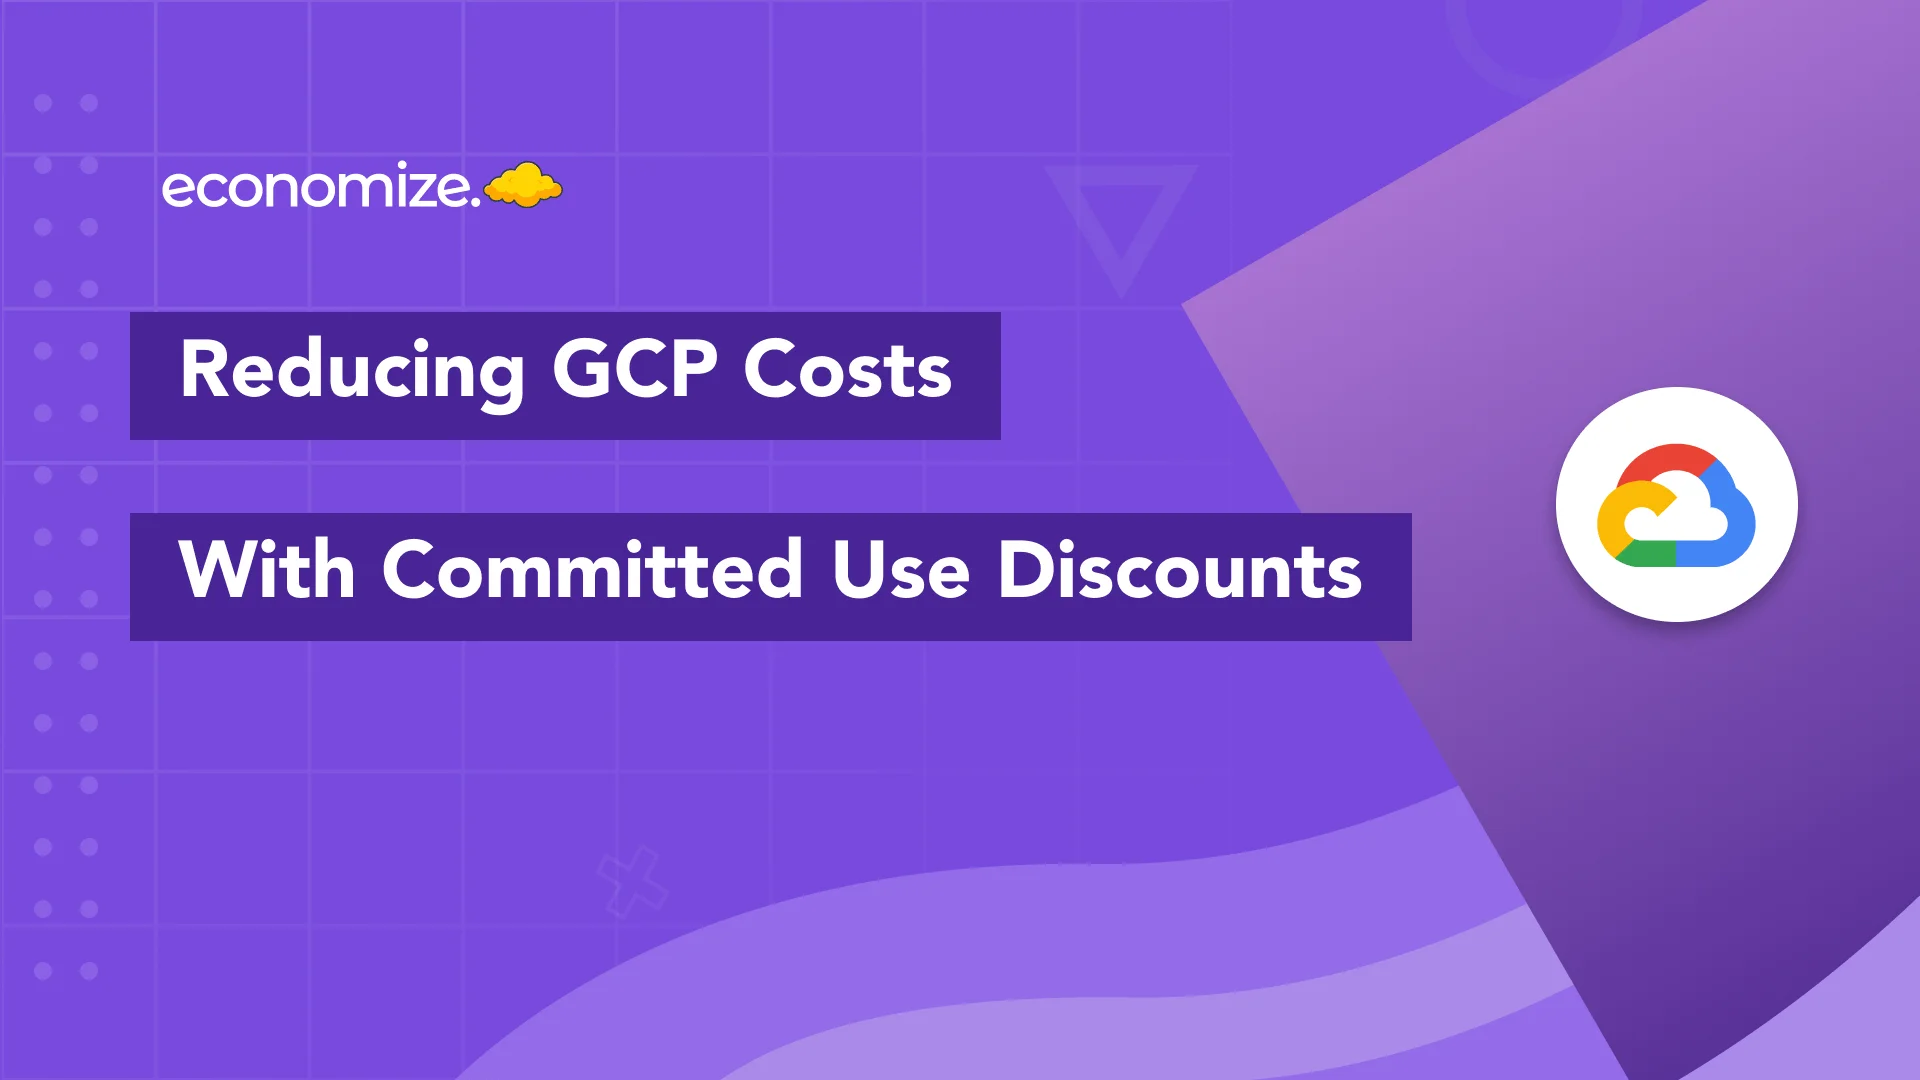 Google Committed Use Discounts, Pricing, Best Practices, Cost Optimization, GCP, CUD